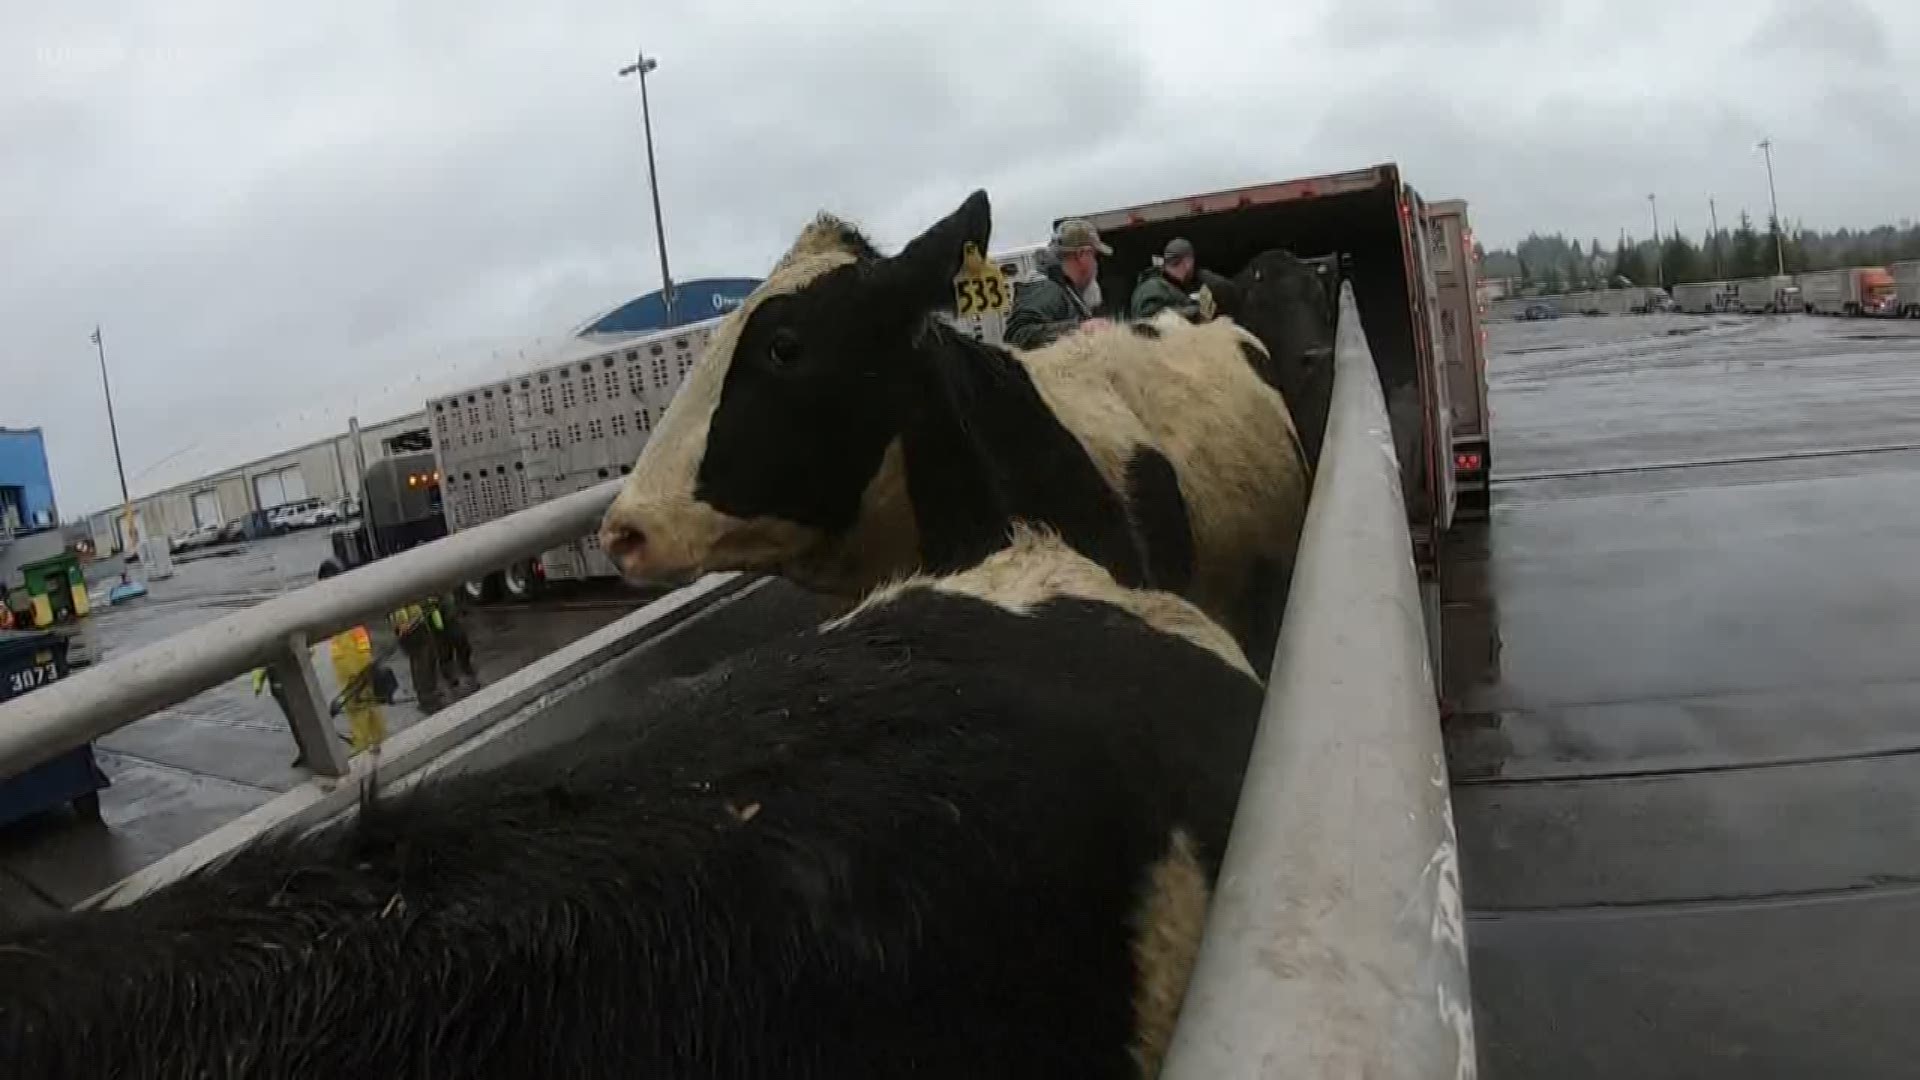 More than 1,400 pregnant dairy cows from California and Idaho shipped out of the Port of Olympia earlier this month.